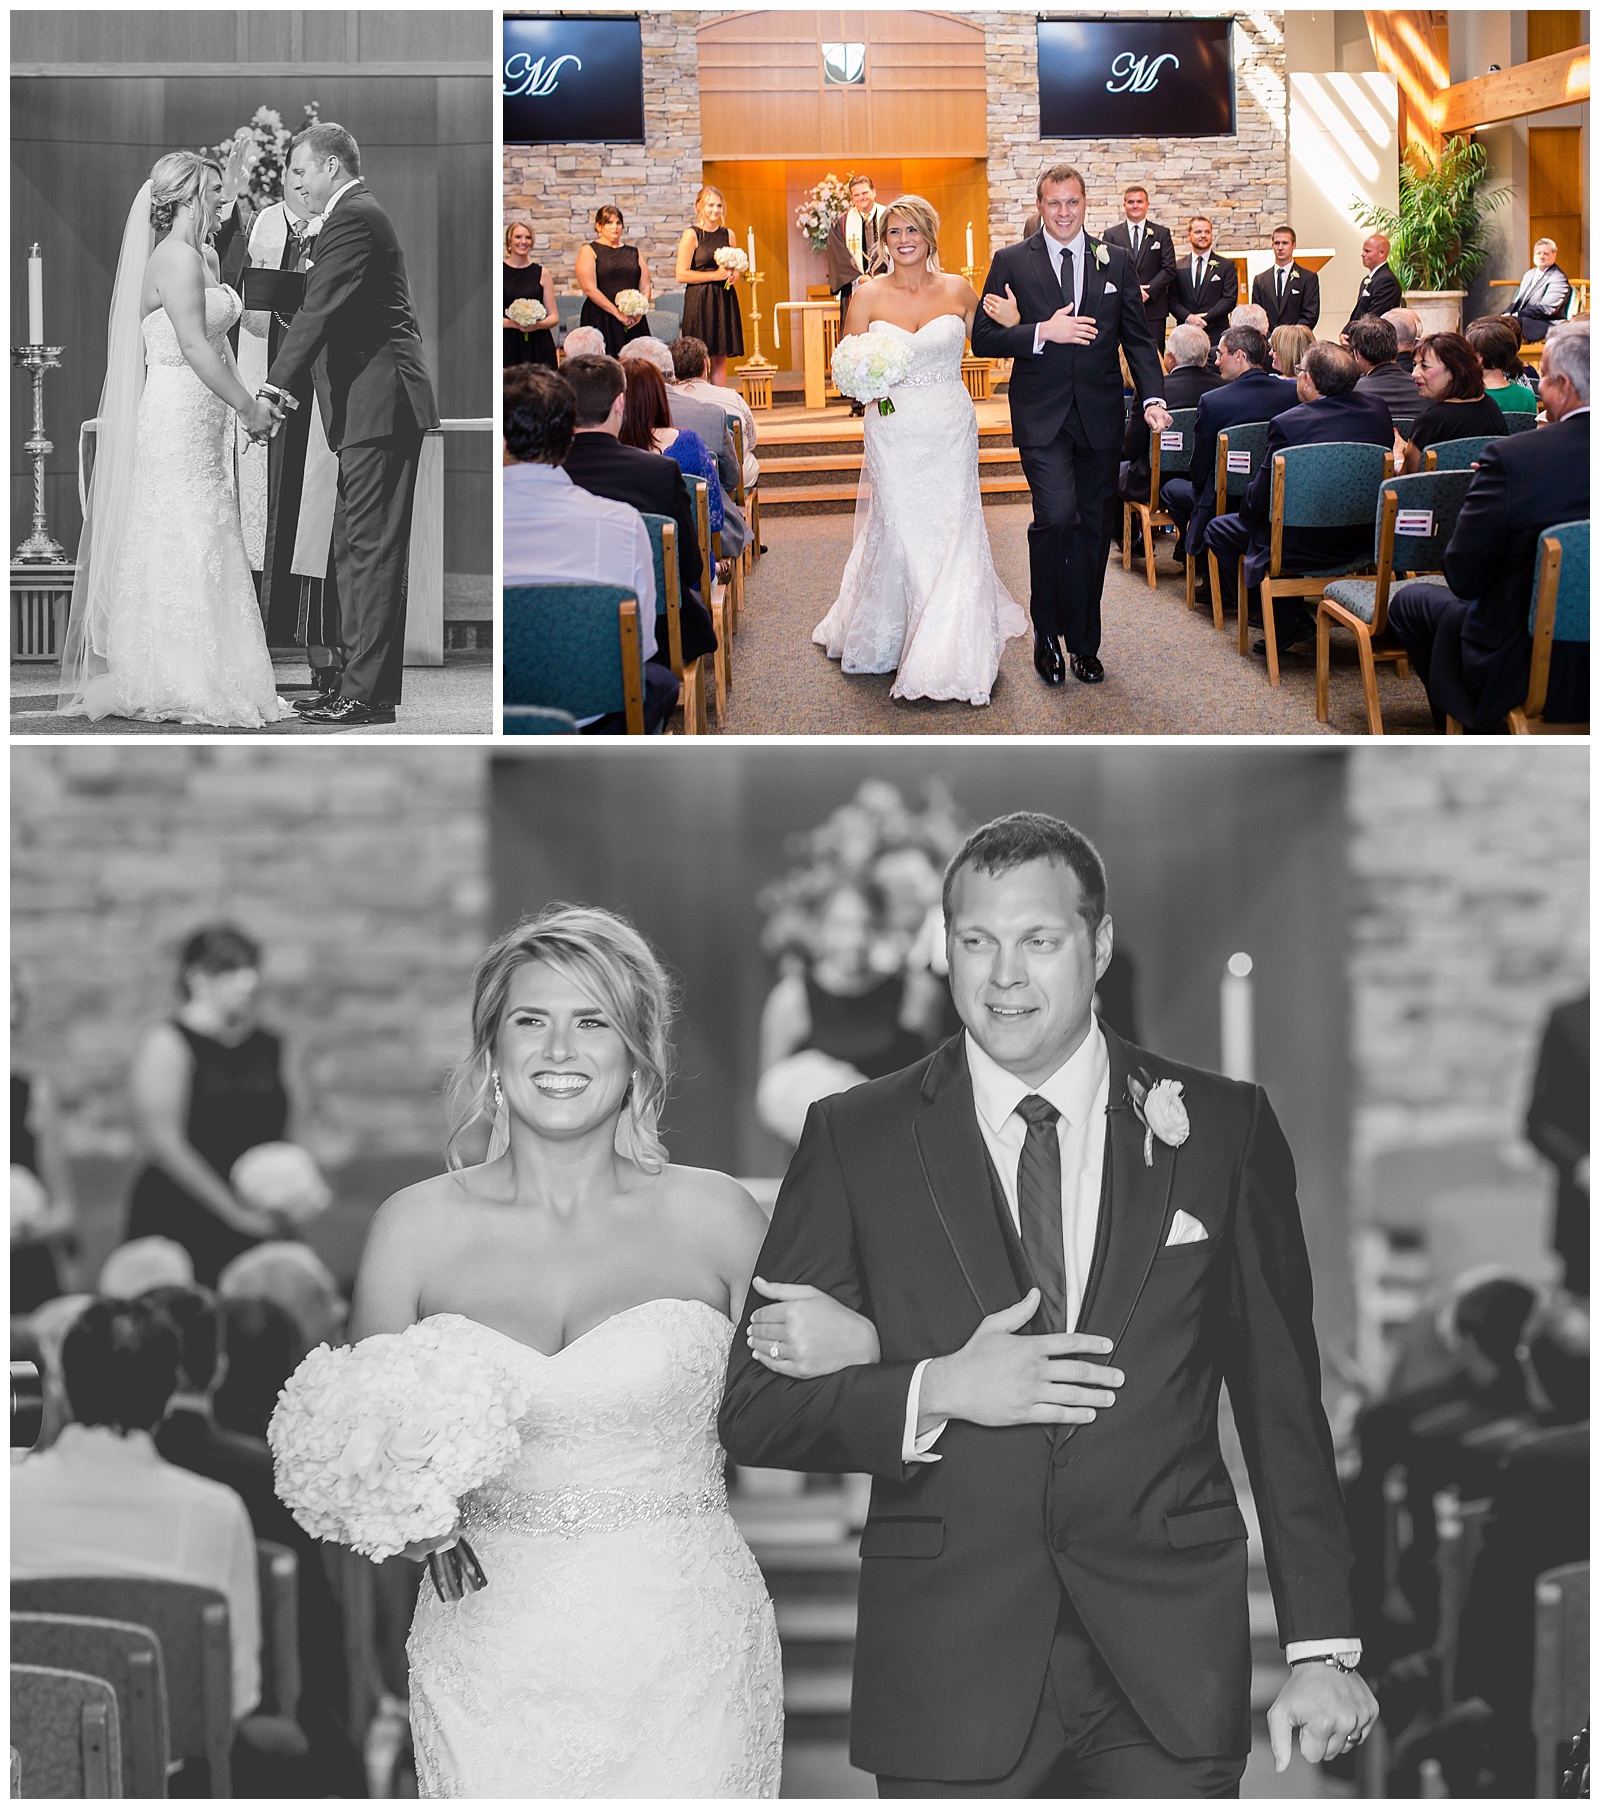 Wedding photography at United Methodist Church of the Resurrection in Leawood, Kansas.